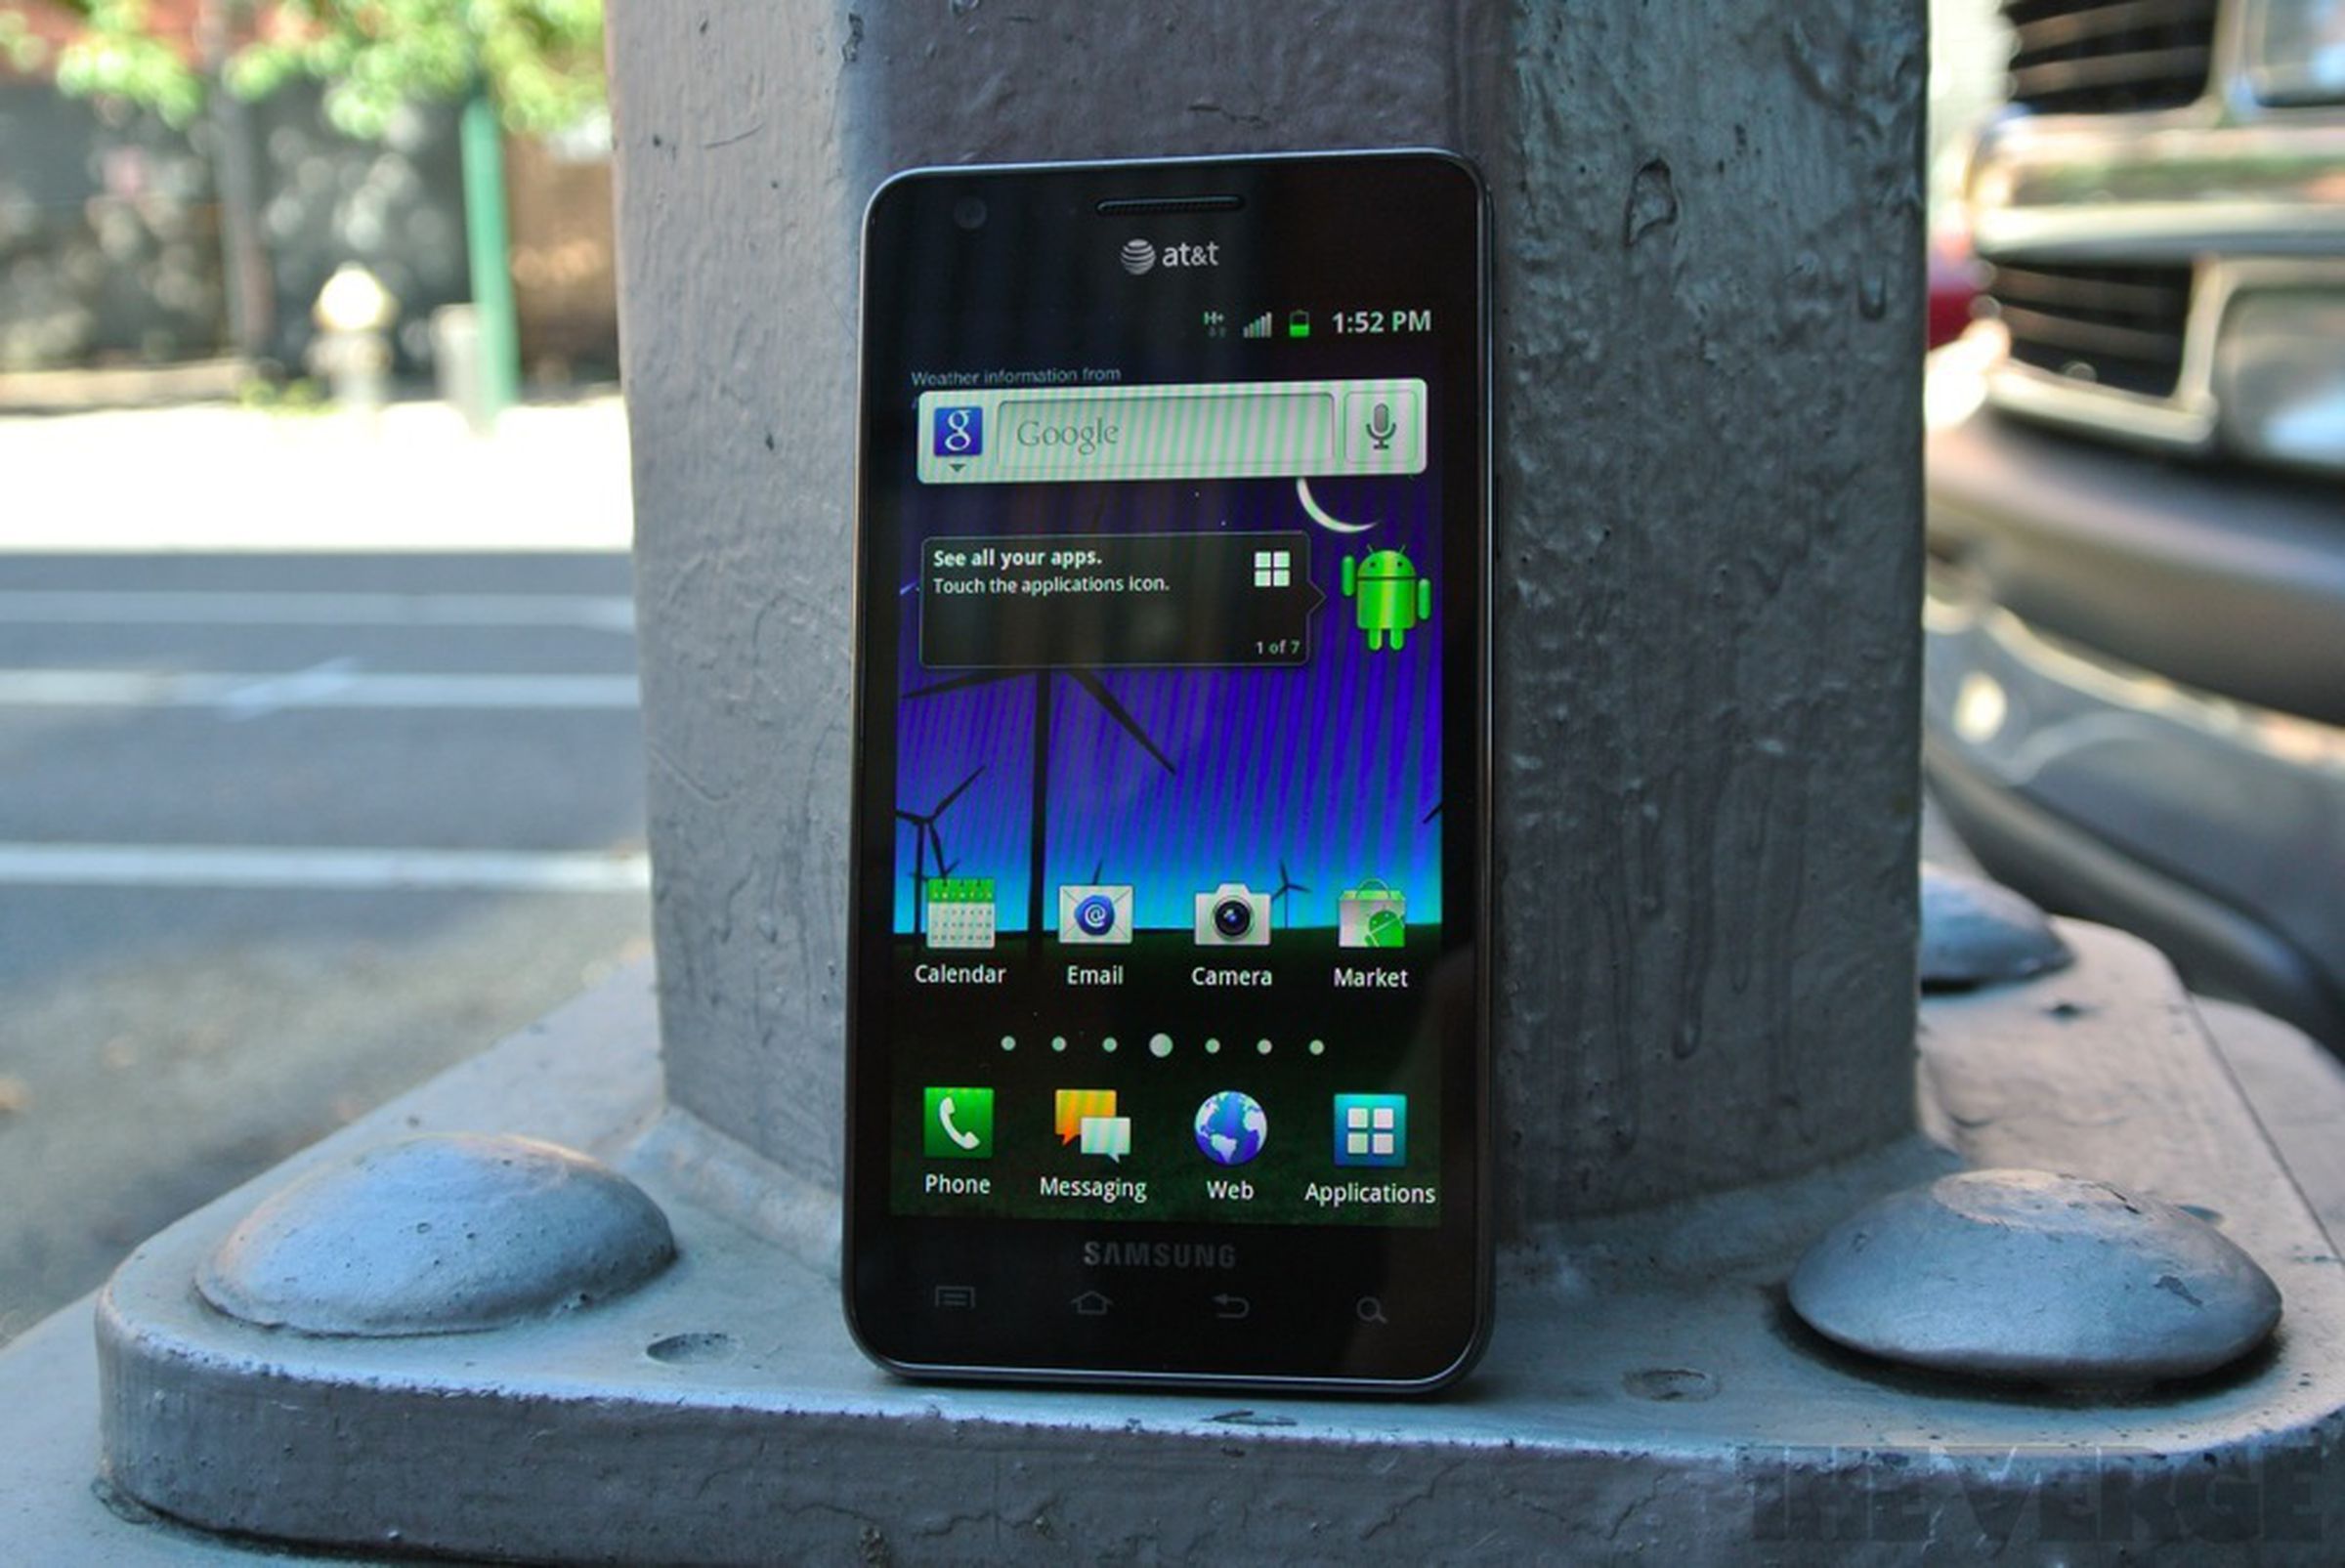 Samsung Galaxy S II for AT&T review photos